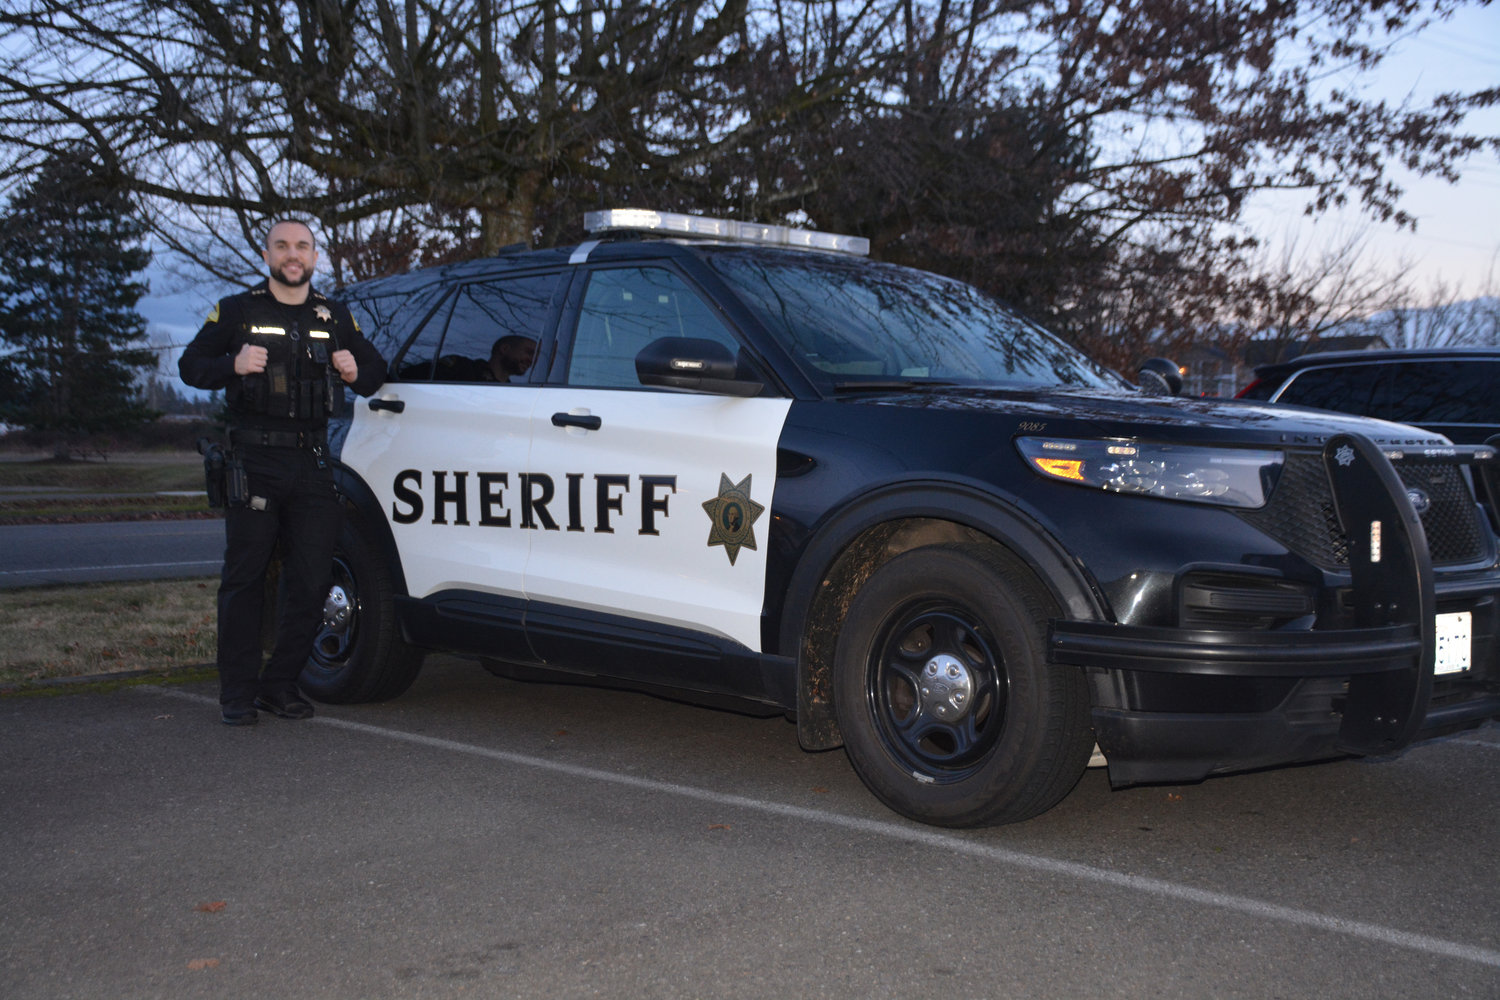 Thurston County Sheriff Derek Sanders poses for a photo in front of his car on Monday, Jan. 16.